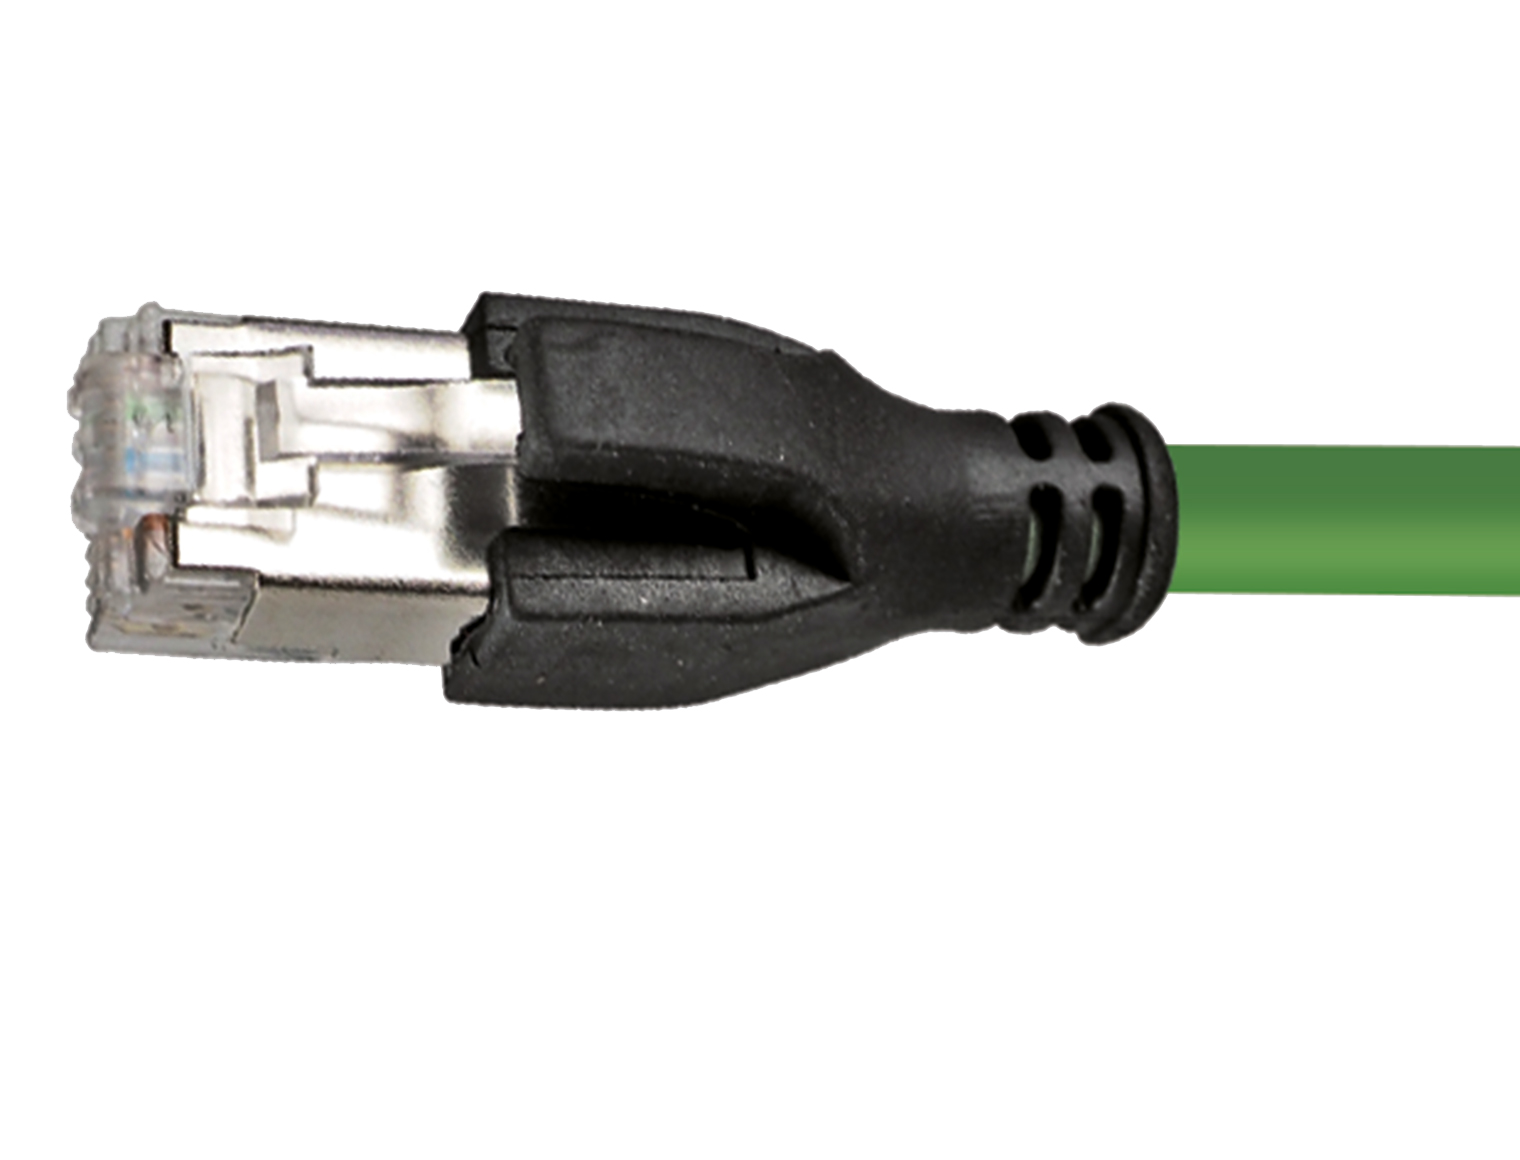 HELUKAT® CONNECTING SYSTEMS® INDUSTRY PROFInet C PVC RJ45 IP20 180°